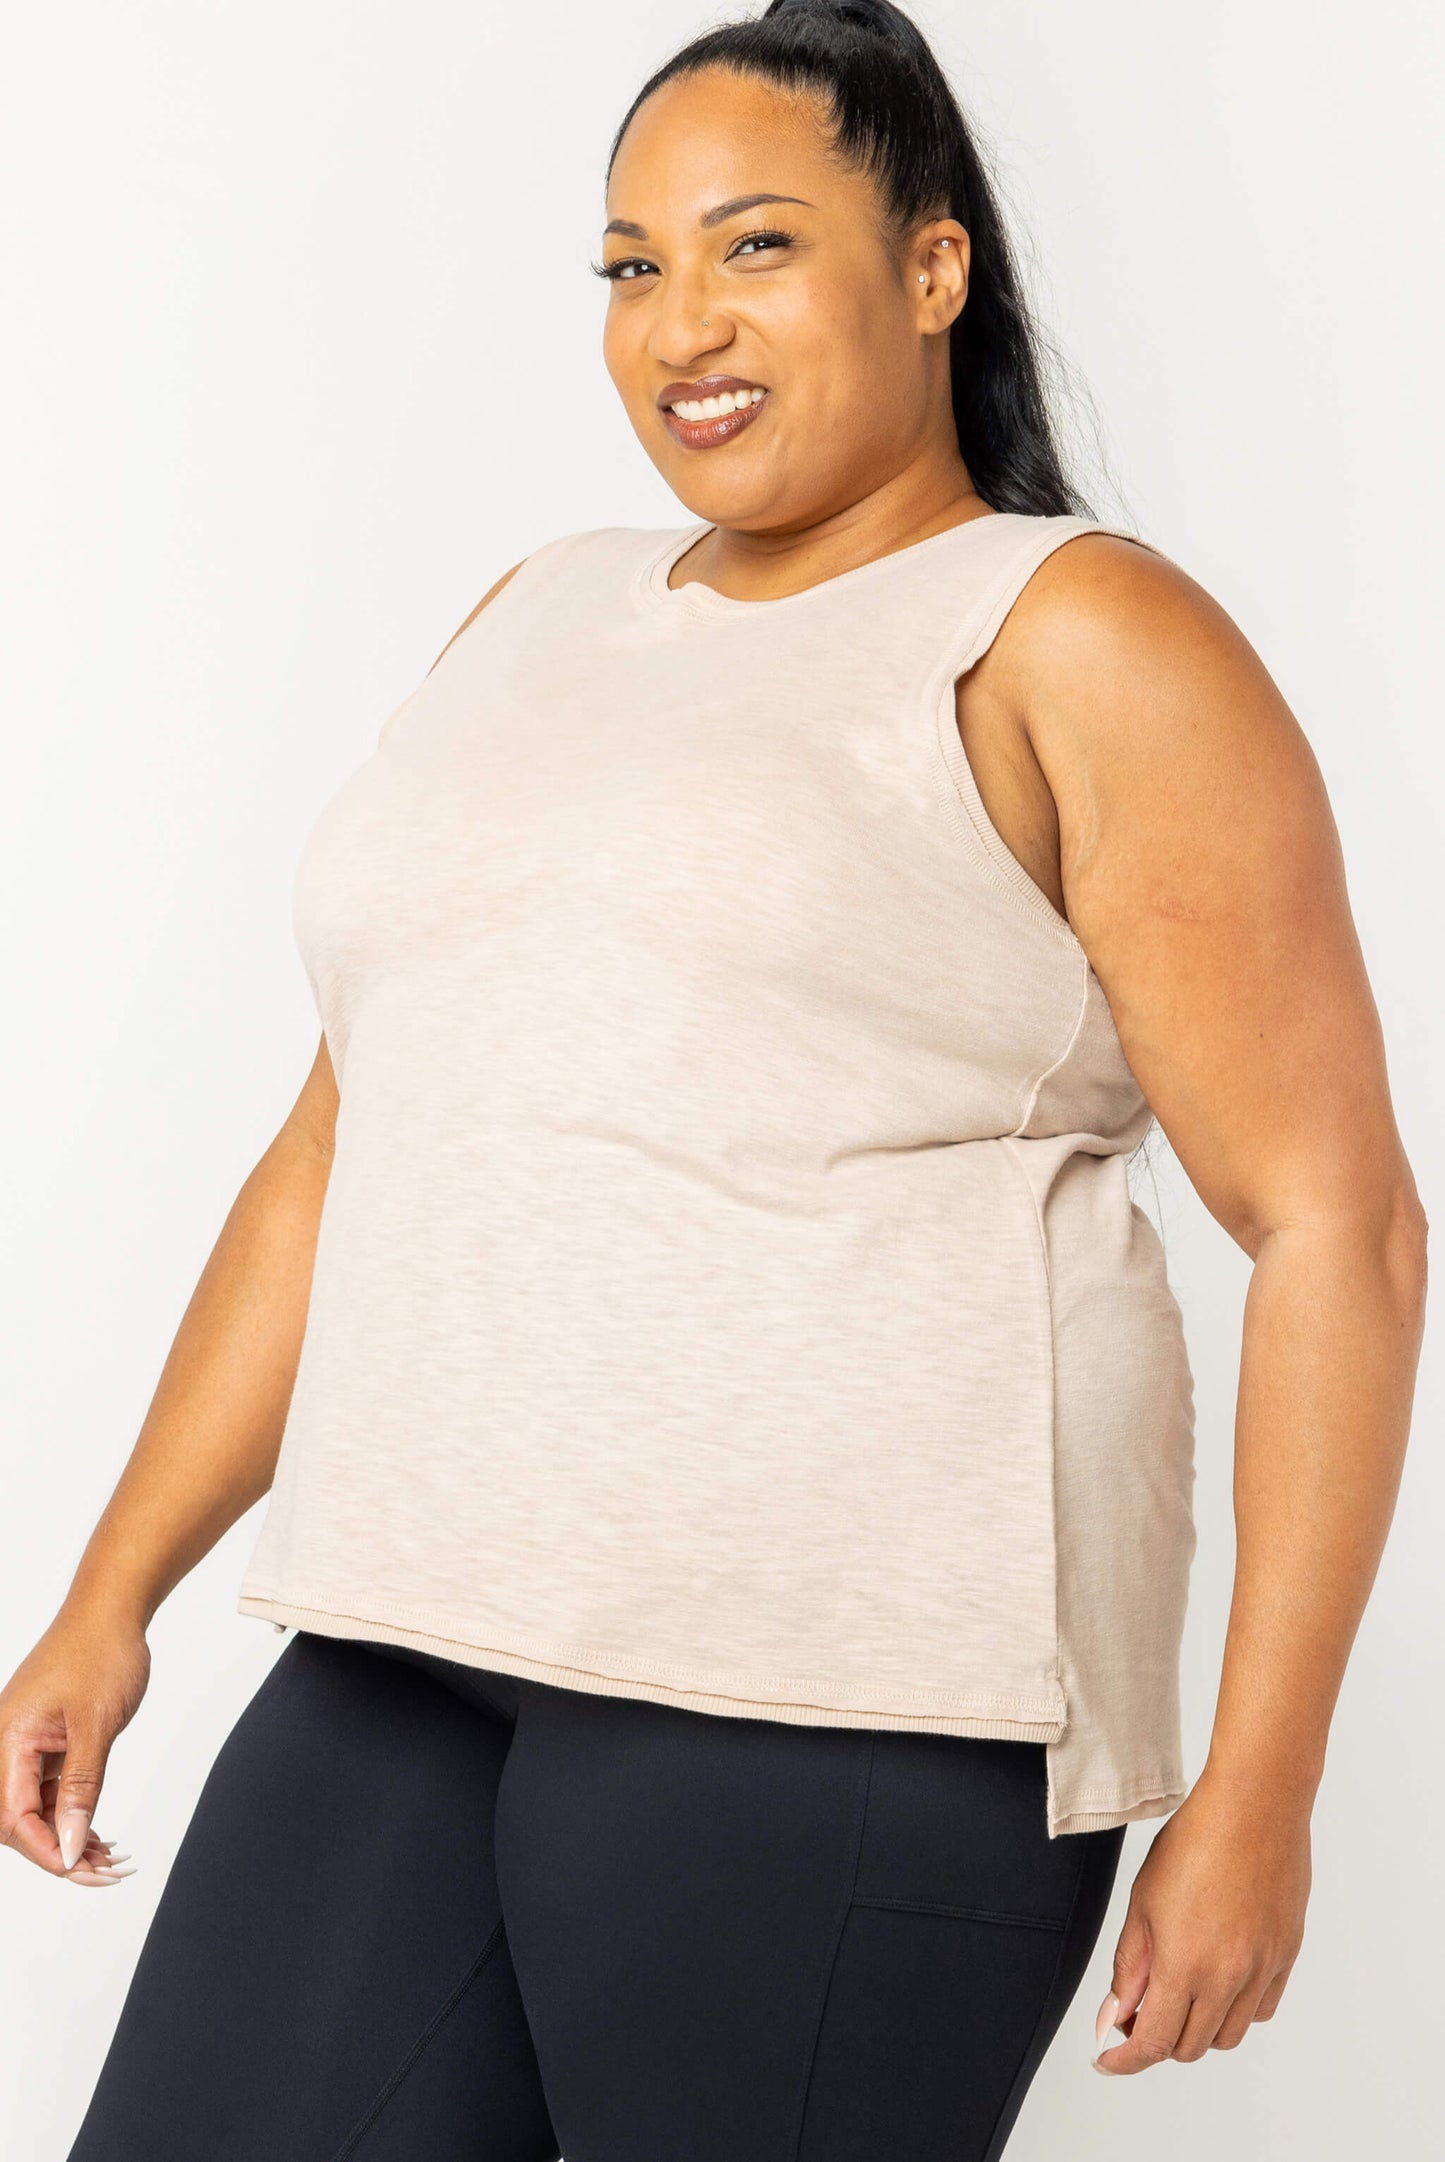 Plus size model wearing textured muscle tank in size 2X